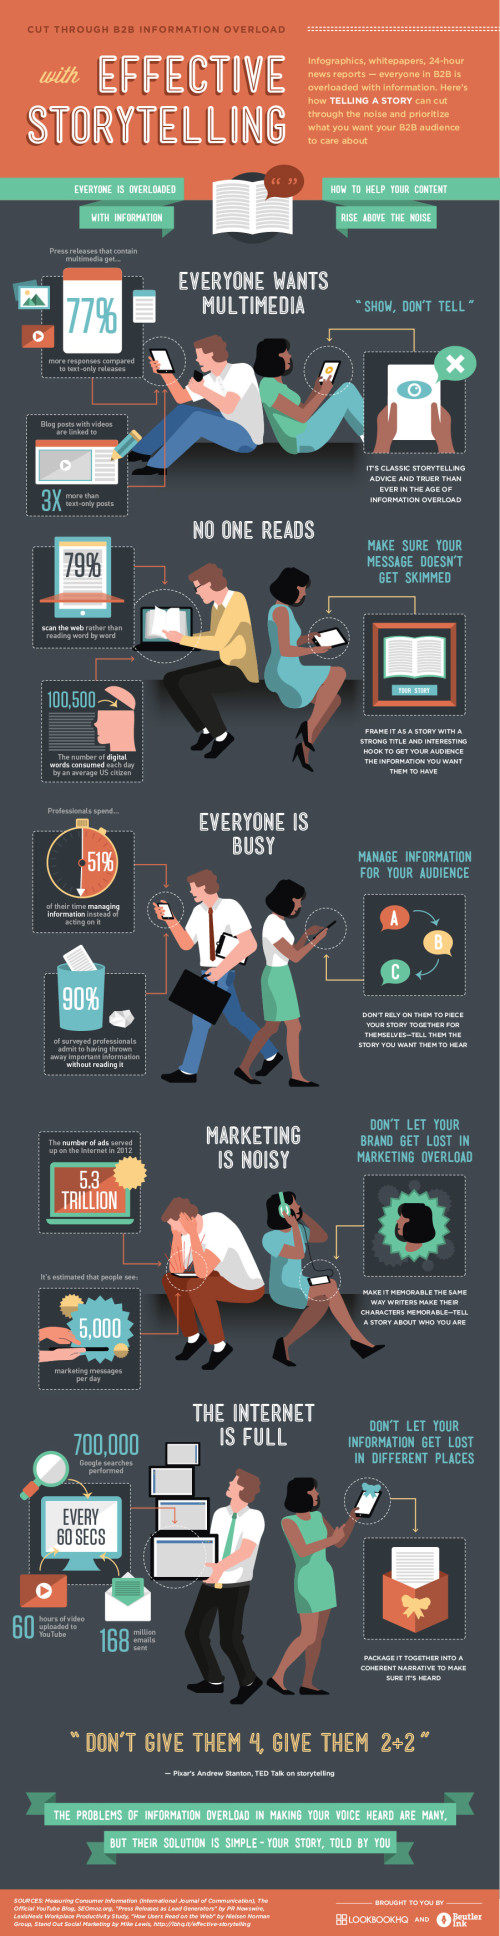 Effective-Storytelling-For-People-Who-Don't-Have-Time-To-Read-Infographic-juntae-delane